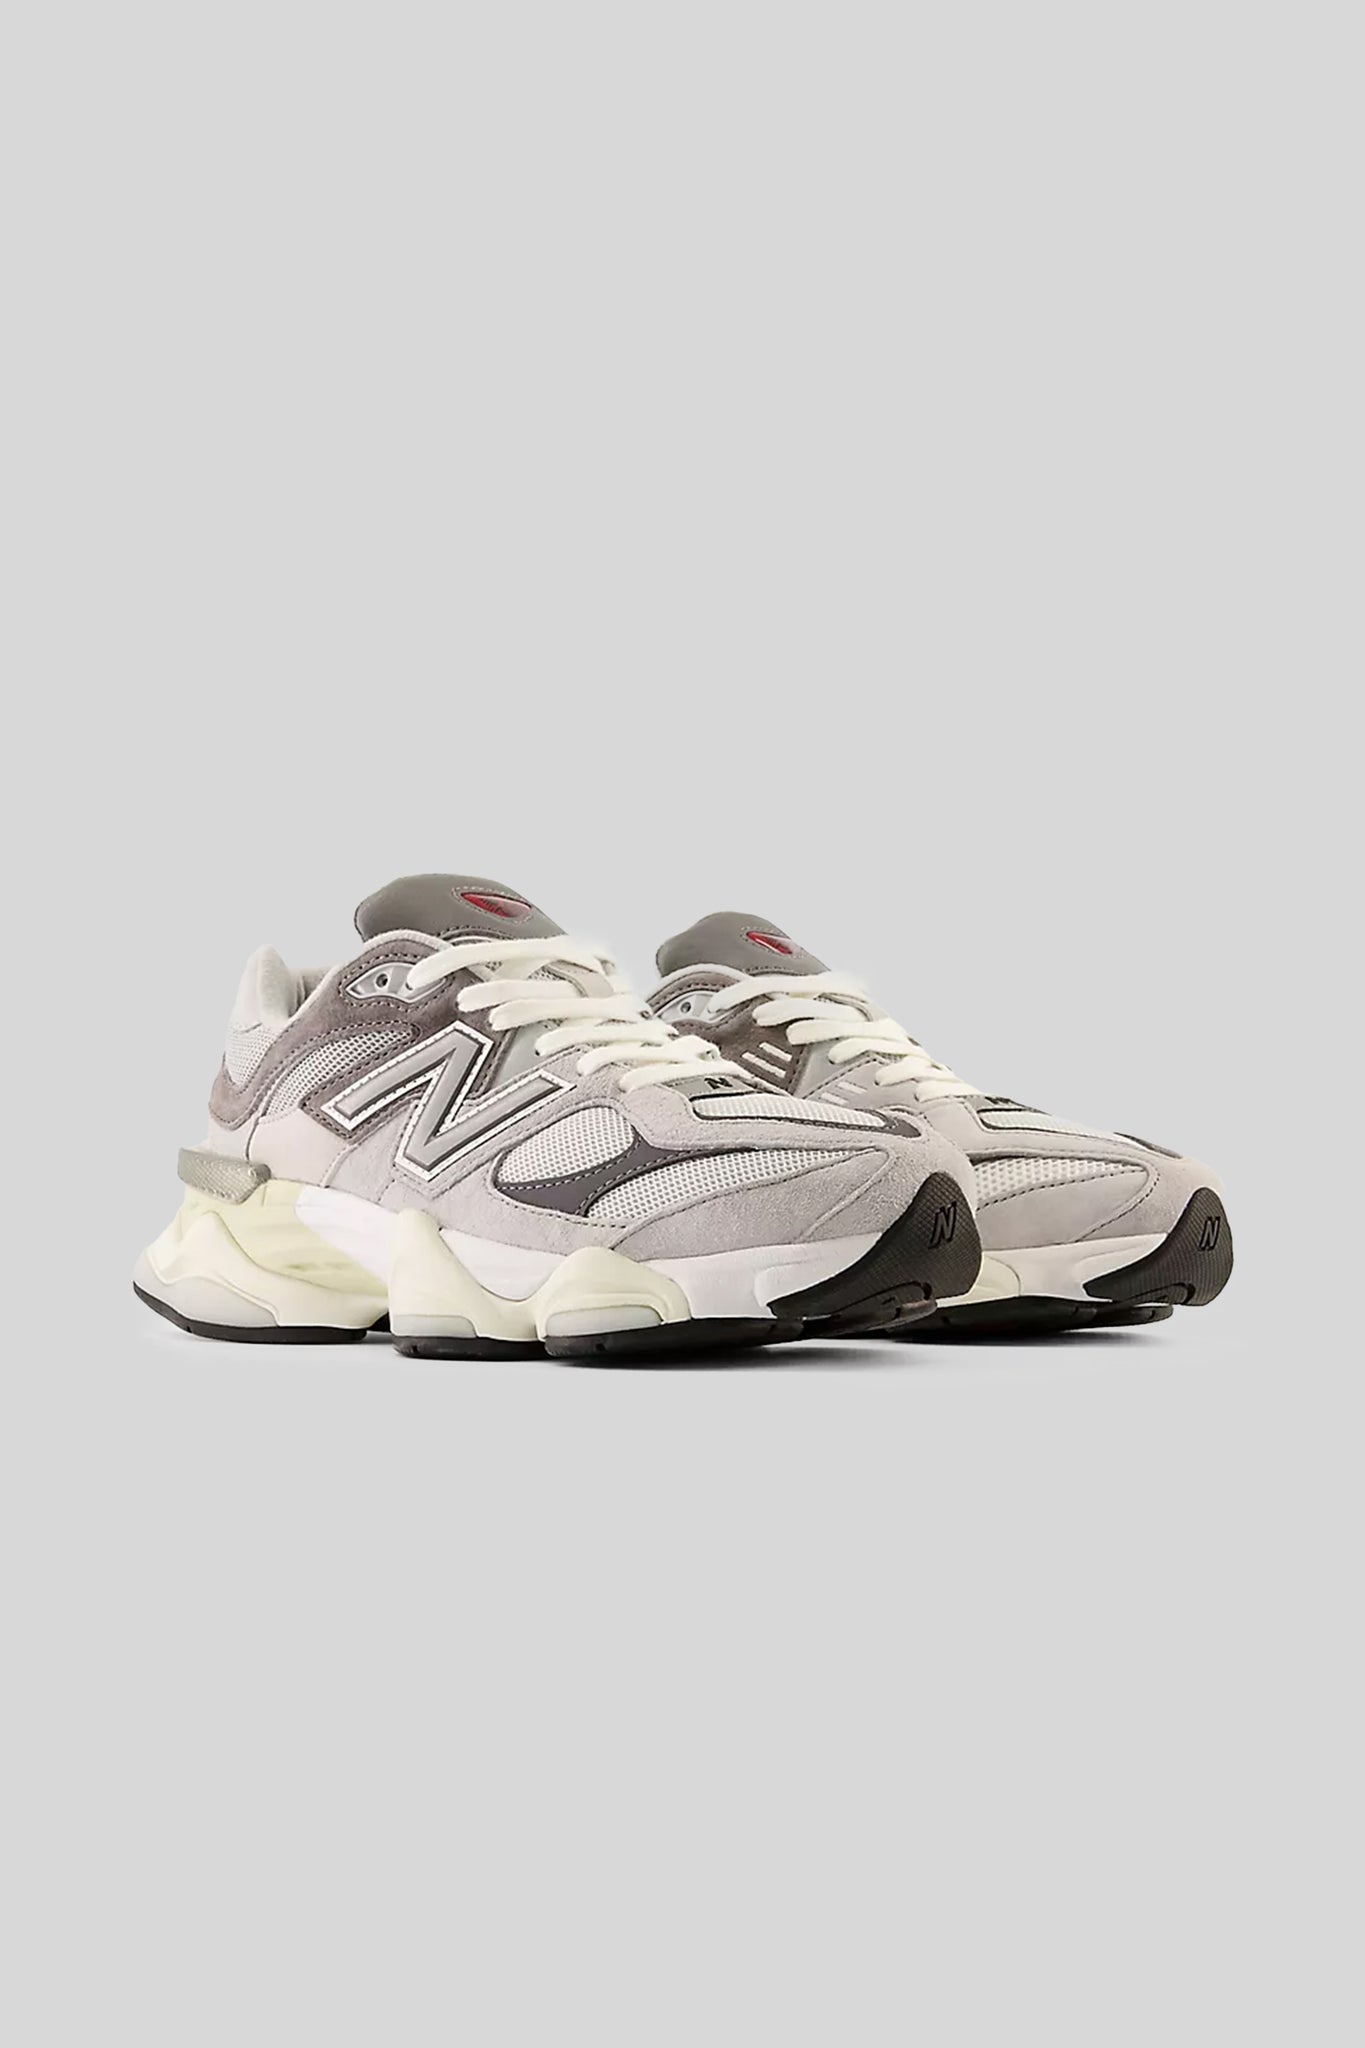 New Balance Unisex 9060 Sneaker in Rain Cloud with Castlerock and White